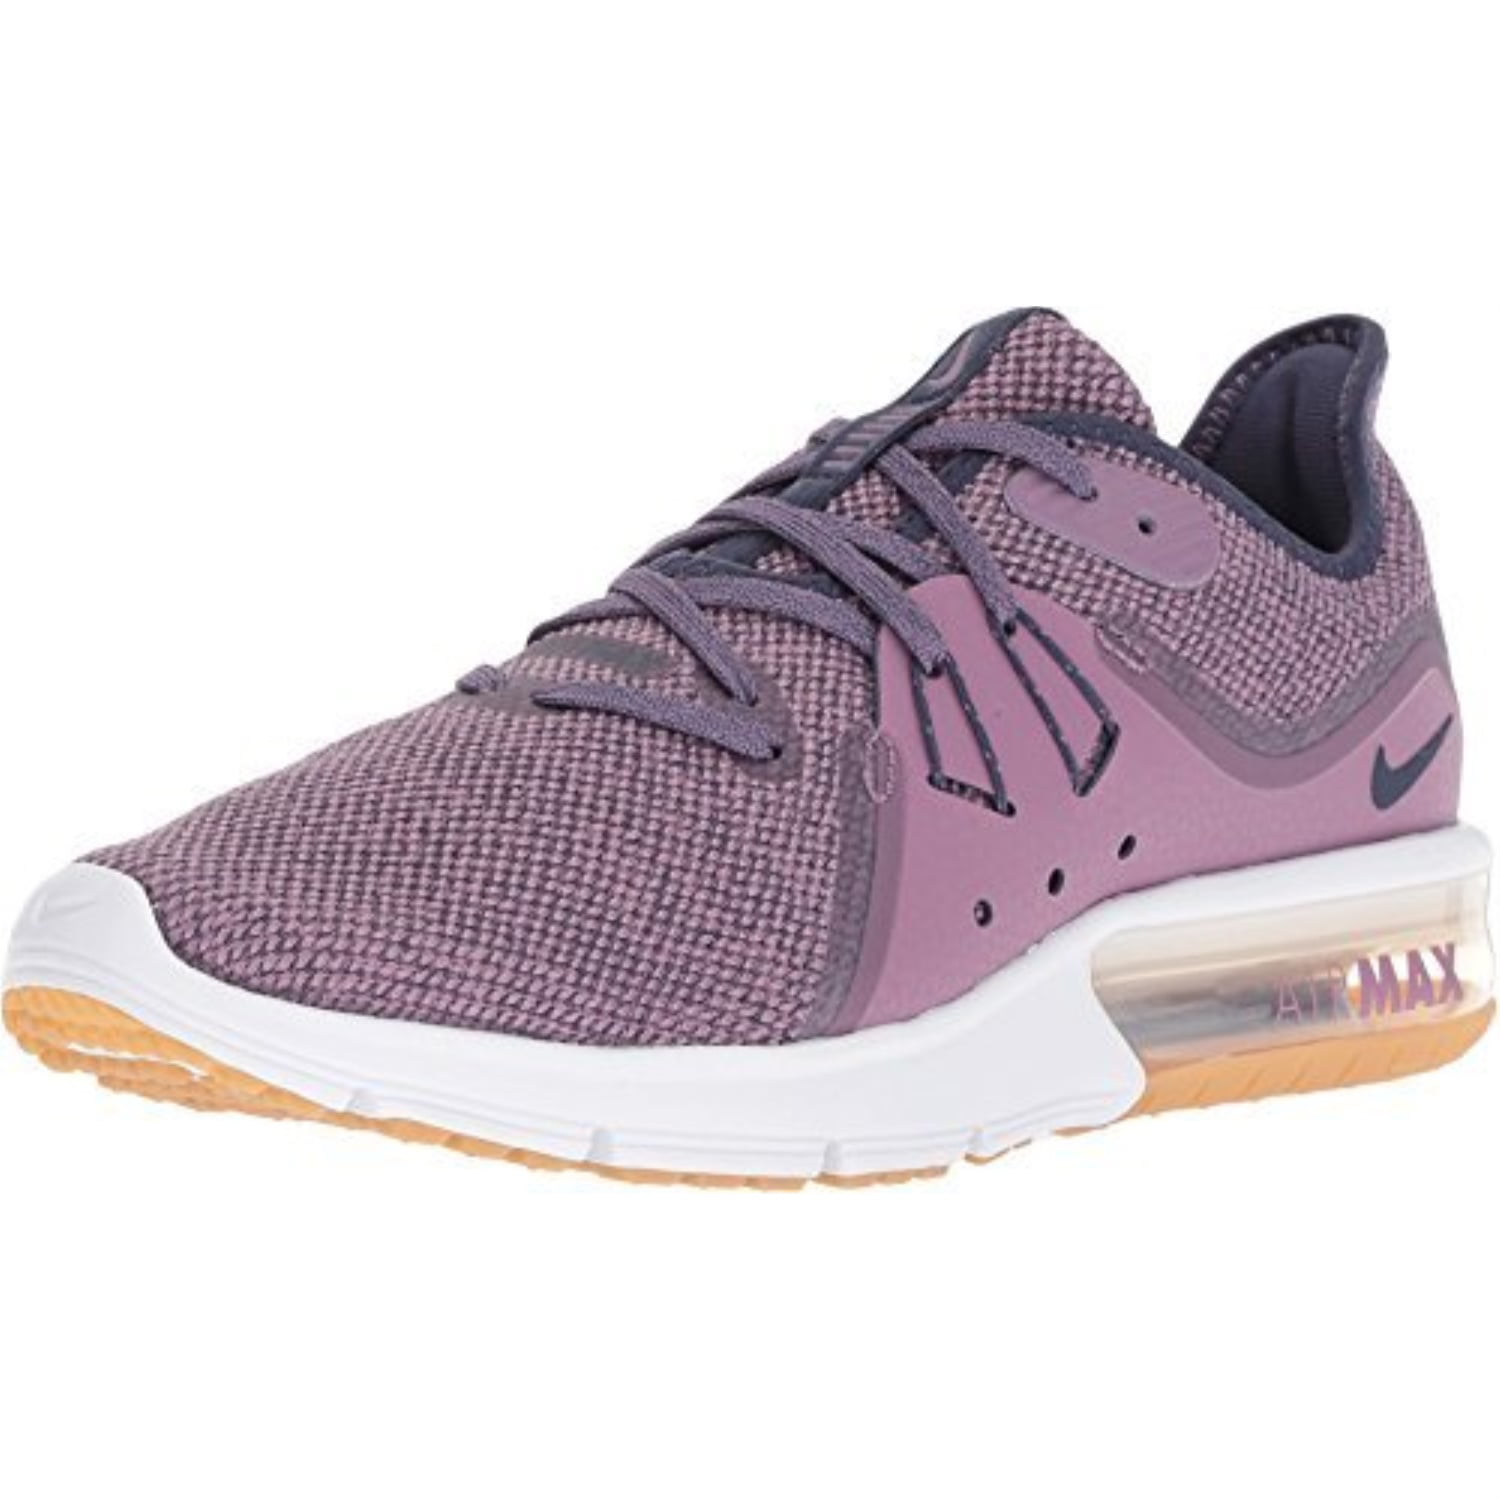 nike air max sequent 3 women's running shoe